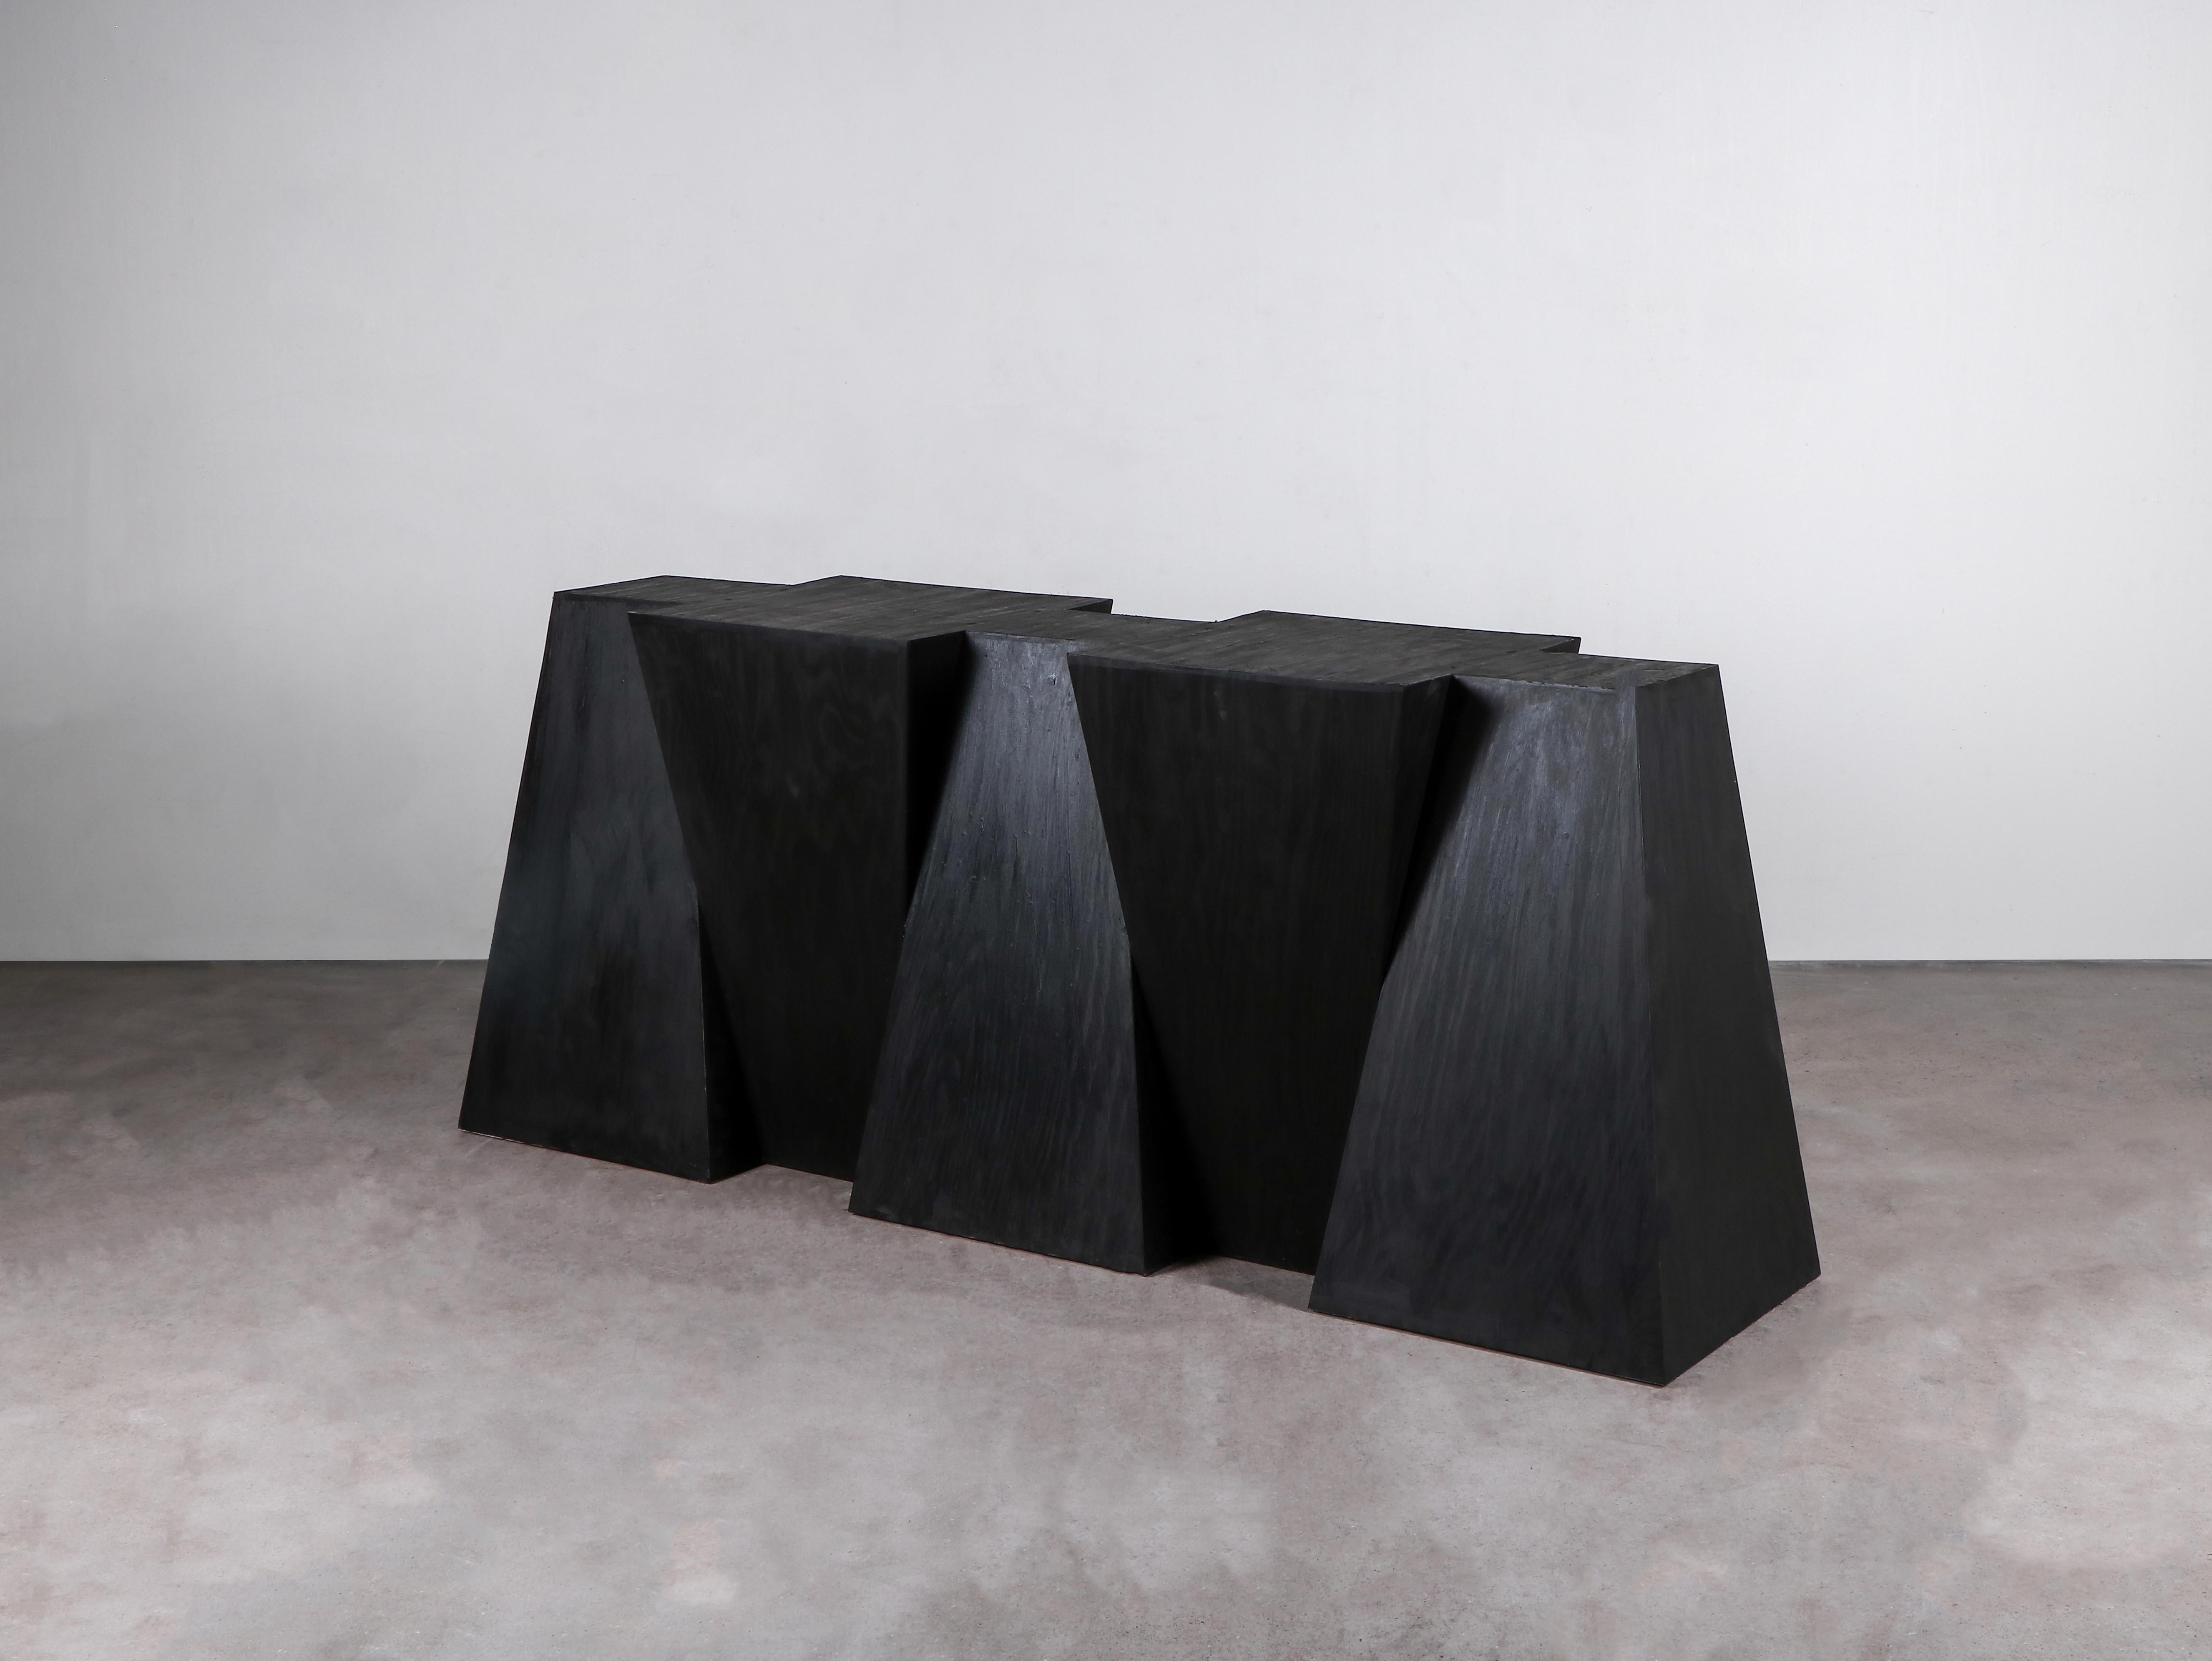 Grav Console by Lucas Tyra Morten
Limited Edition of 11 + 1 AP
Signed
Dimensions: D40 x W160 x H67 cm
Material: Hand waxed plywood

Objects comes with a 